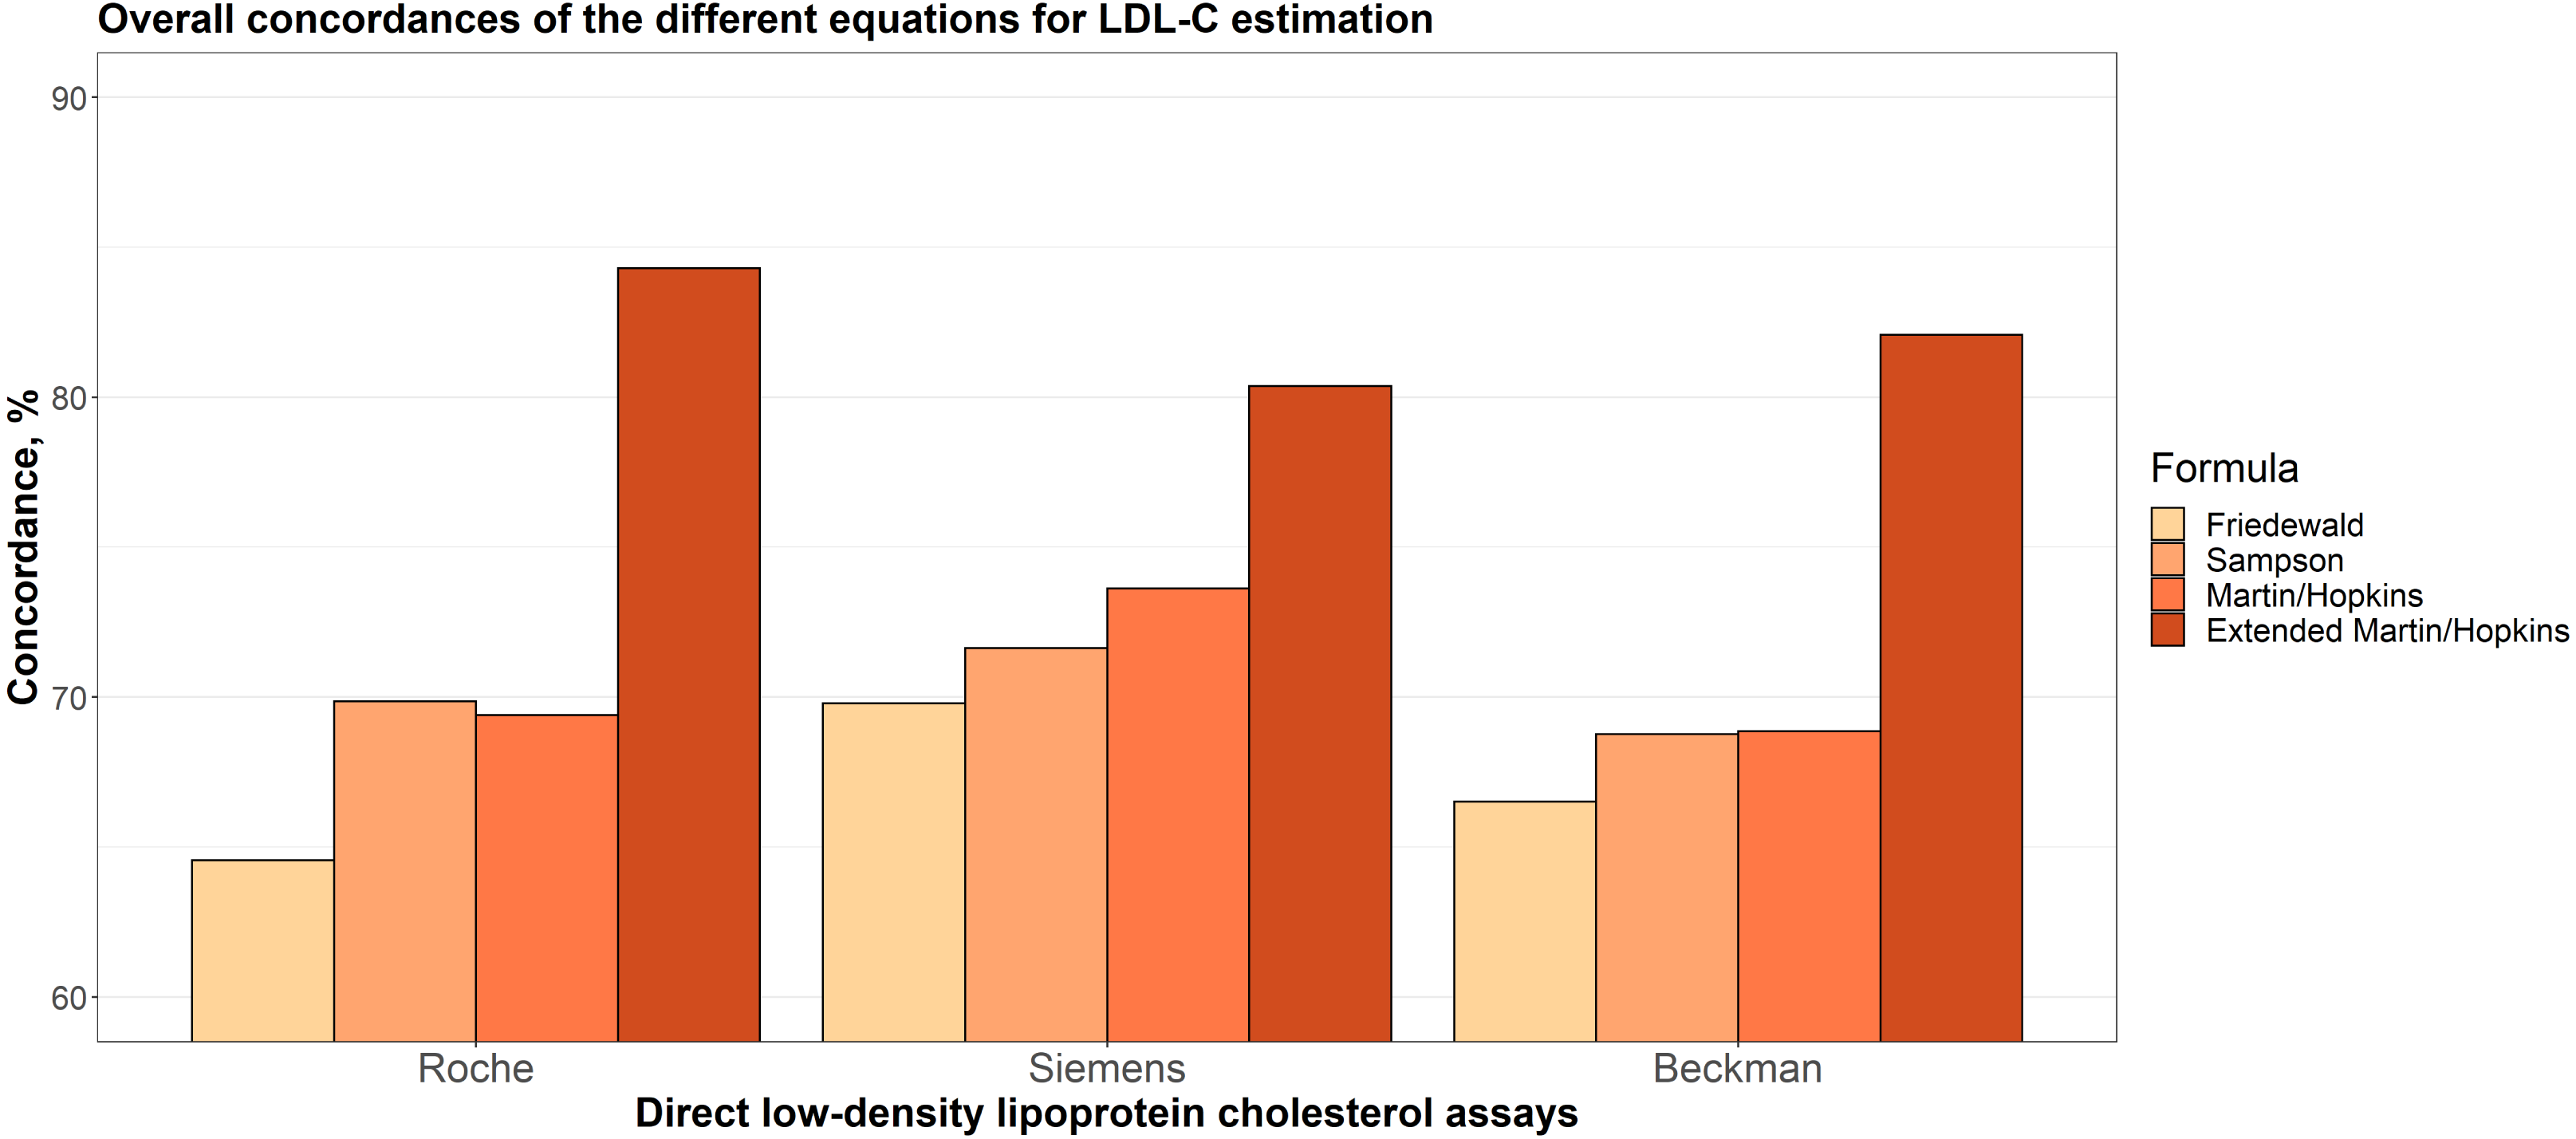 Martin/Hopkins Method to Calculate LDL or 'Bad' Cholesterol Outperforms  Other Equations, Study Shows